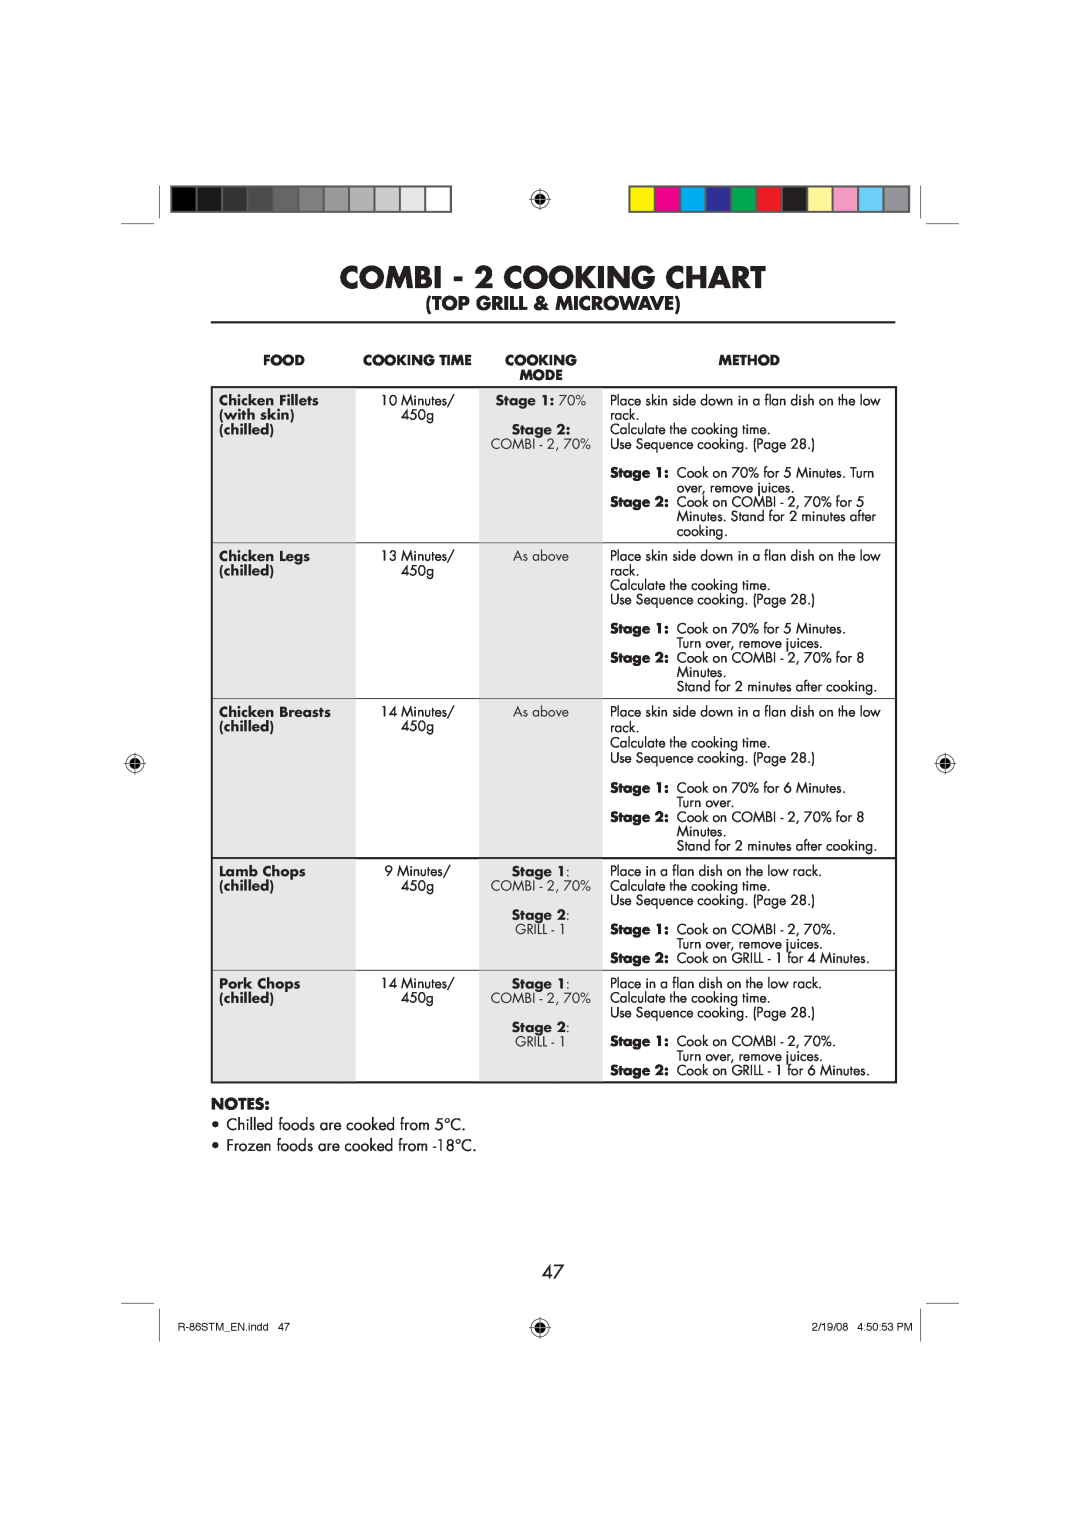 Sharp R-86STM manual COMBI - 2 COOKING CHART, Top Grill & Microwave 